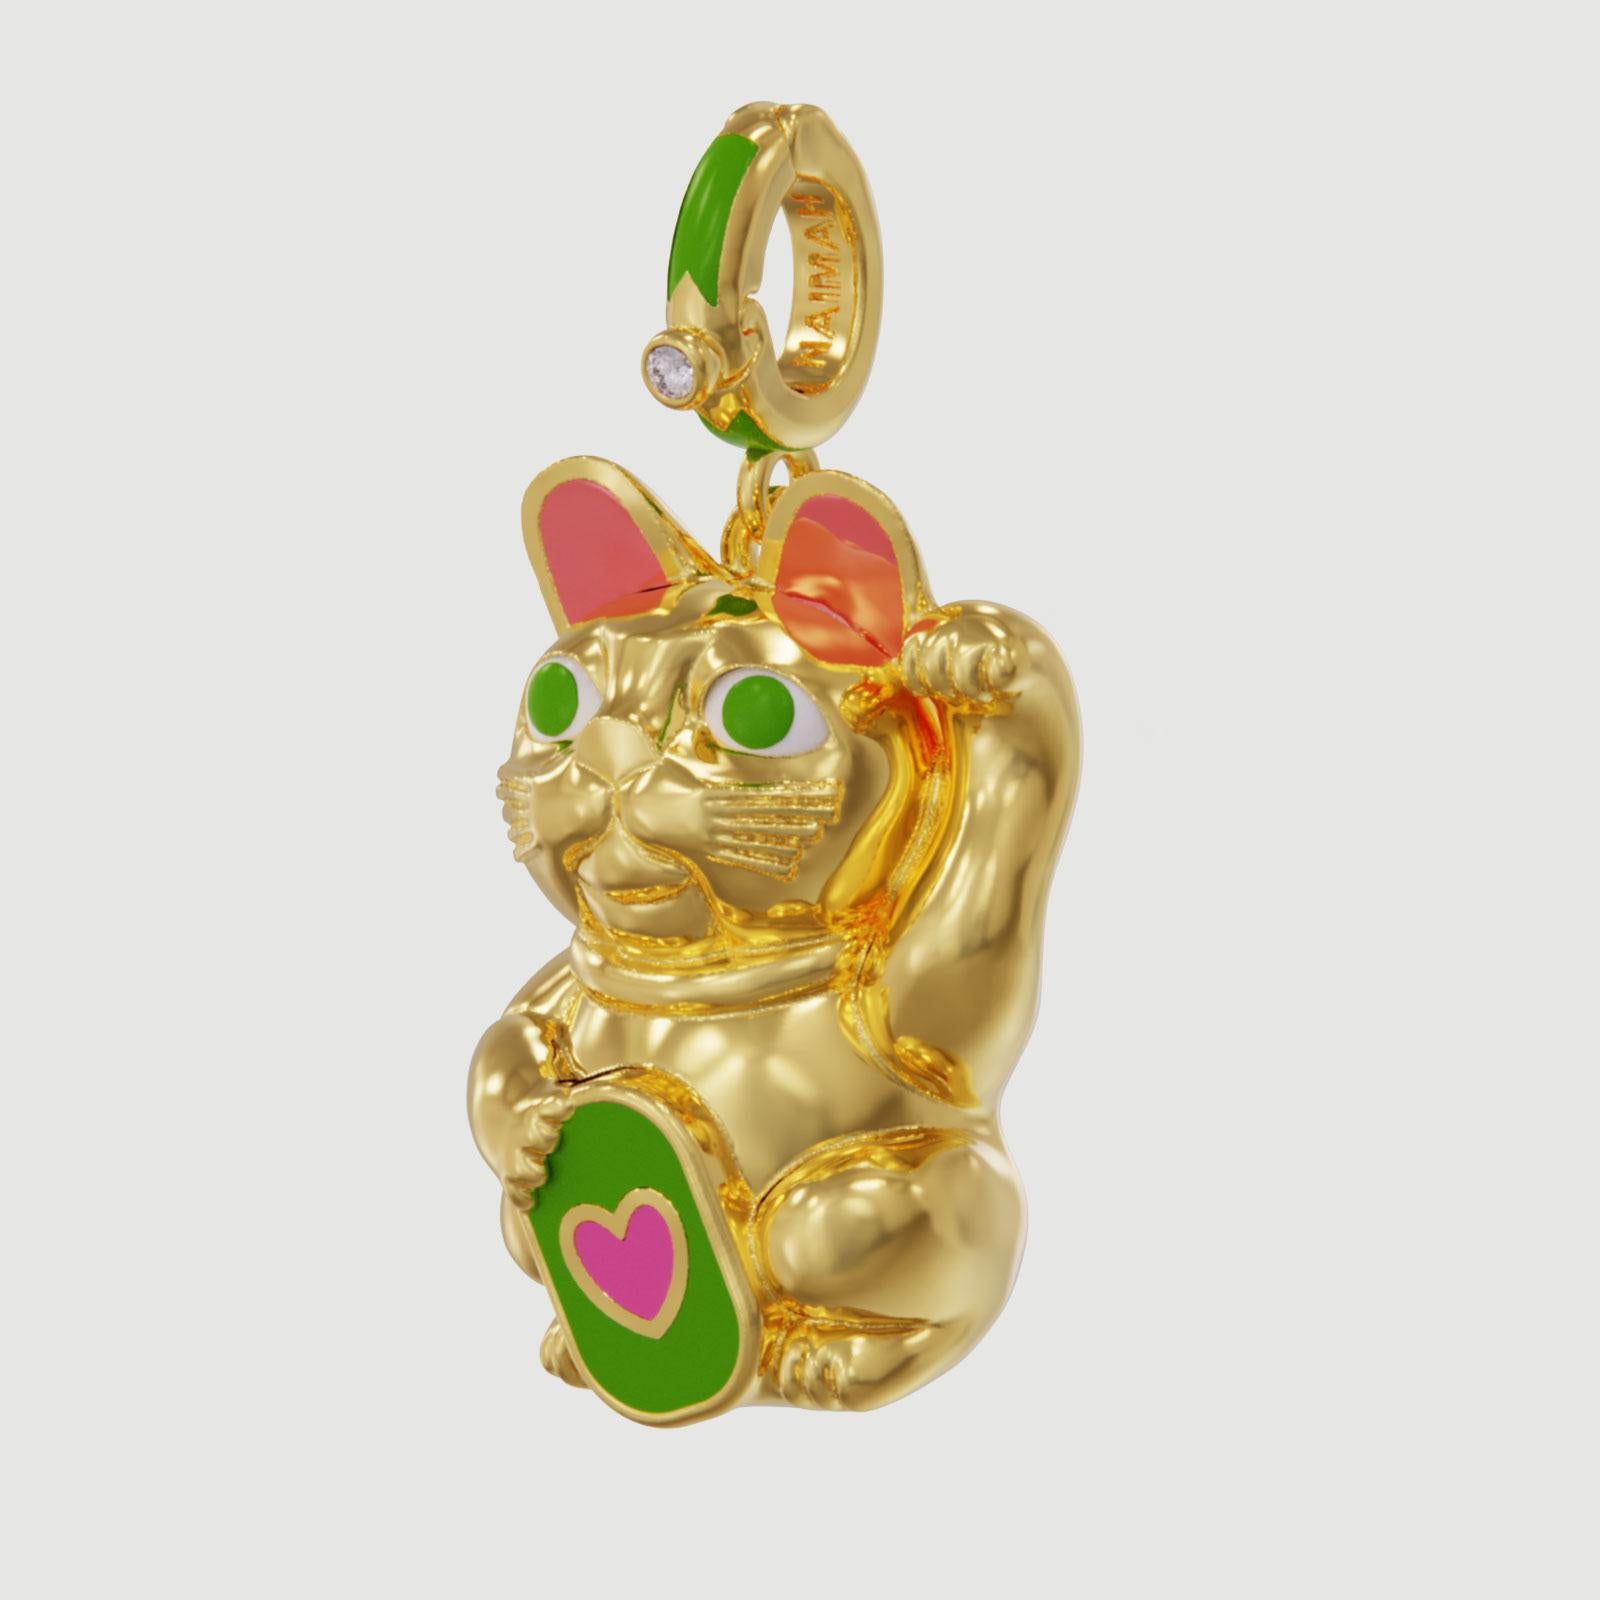 Presenting our Maneki-neko Pendant – a captivating blend of Japanese tradition and contemporary artistry. Crafted in elegant gold vermeil, this pendant pay tribute to the iconic 